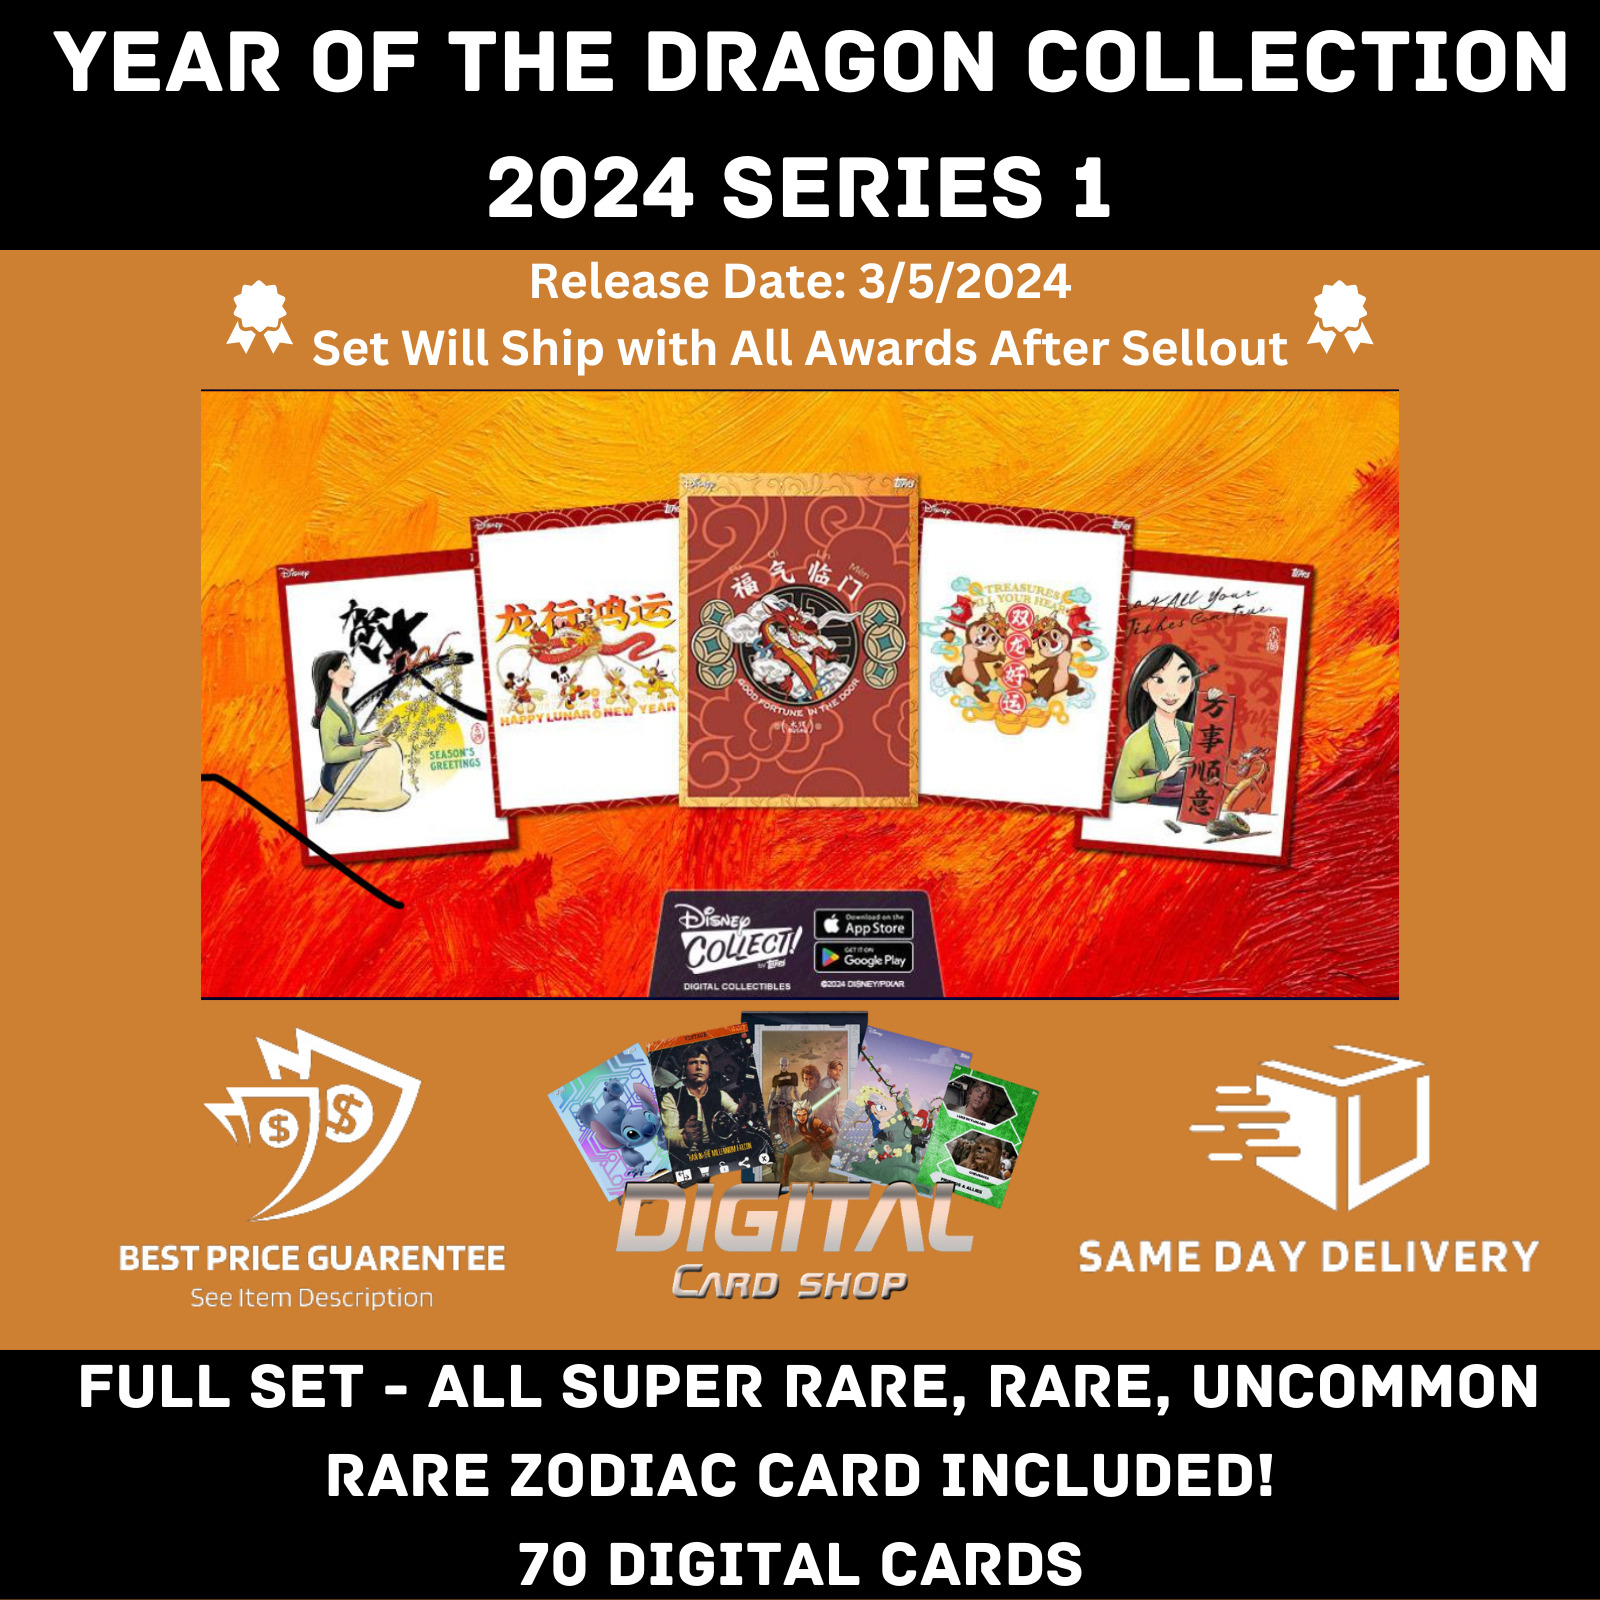 Topps Disney Collect Year of the Dragon Collection - Full Set + Zodiac Card 70